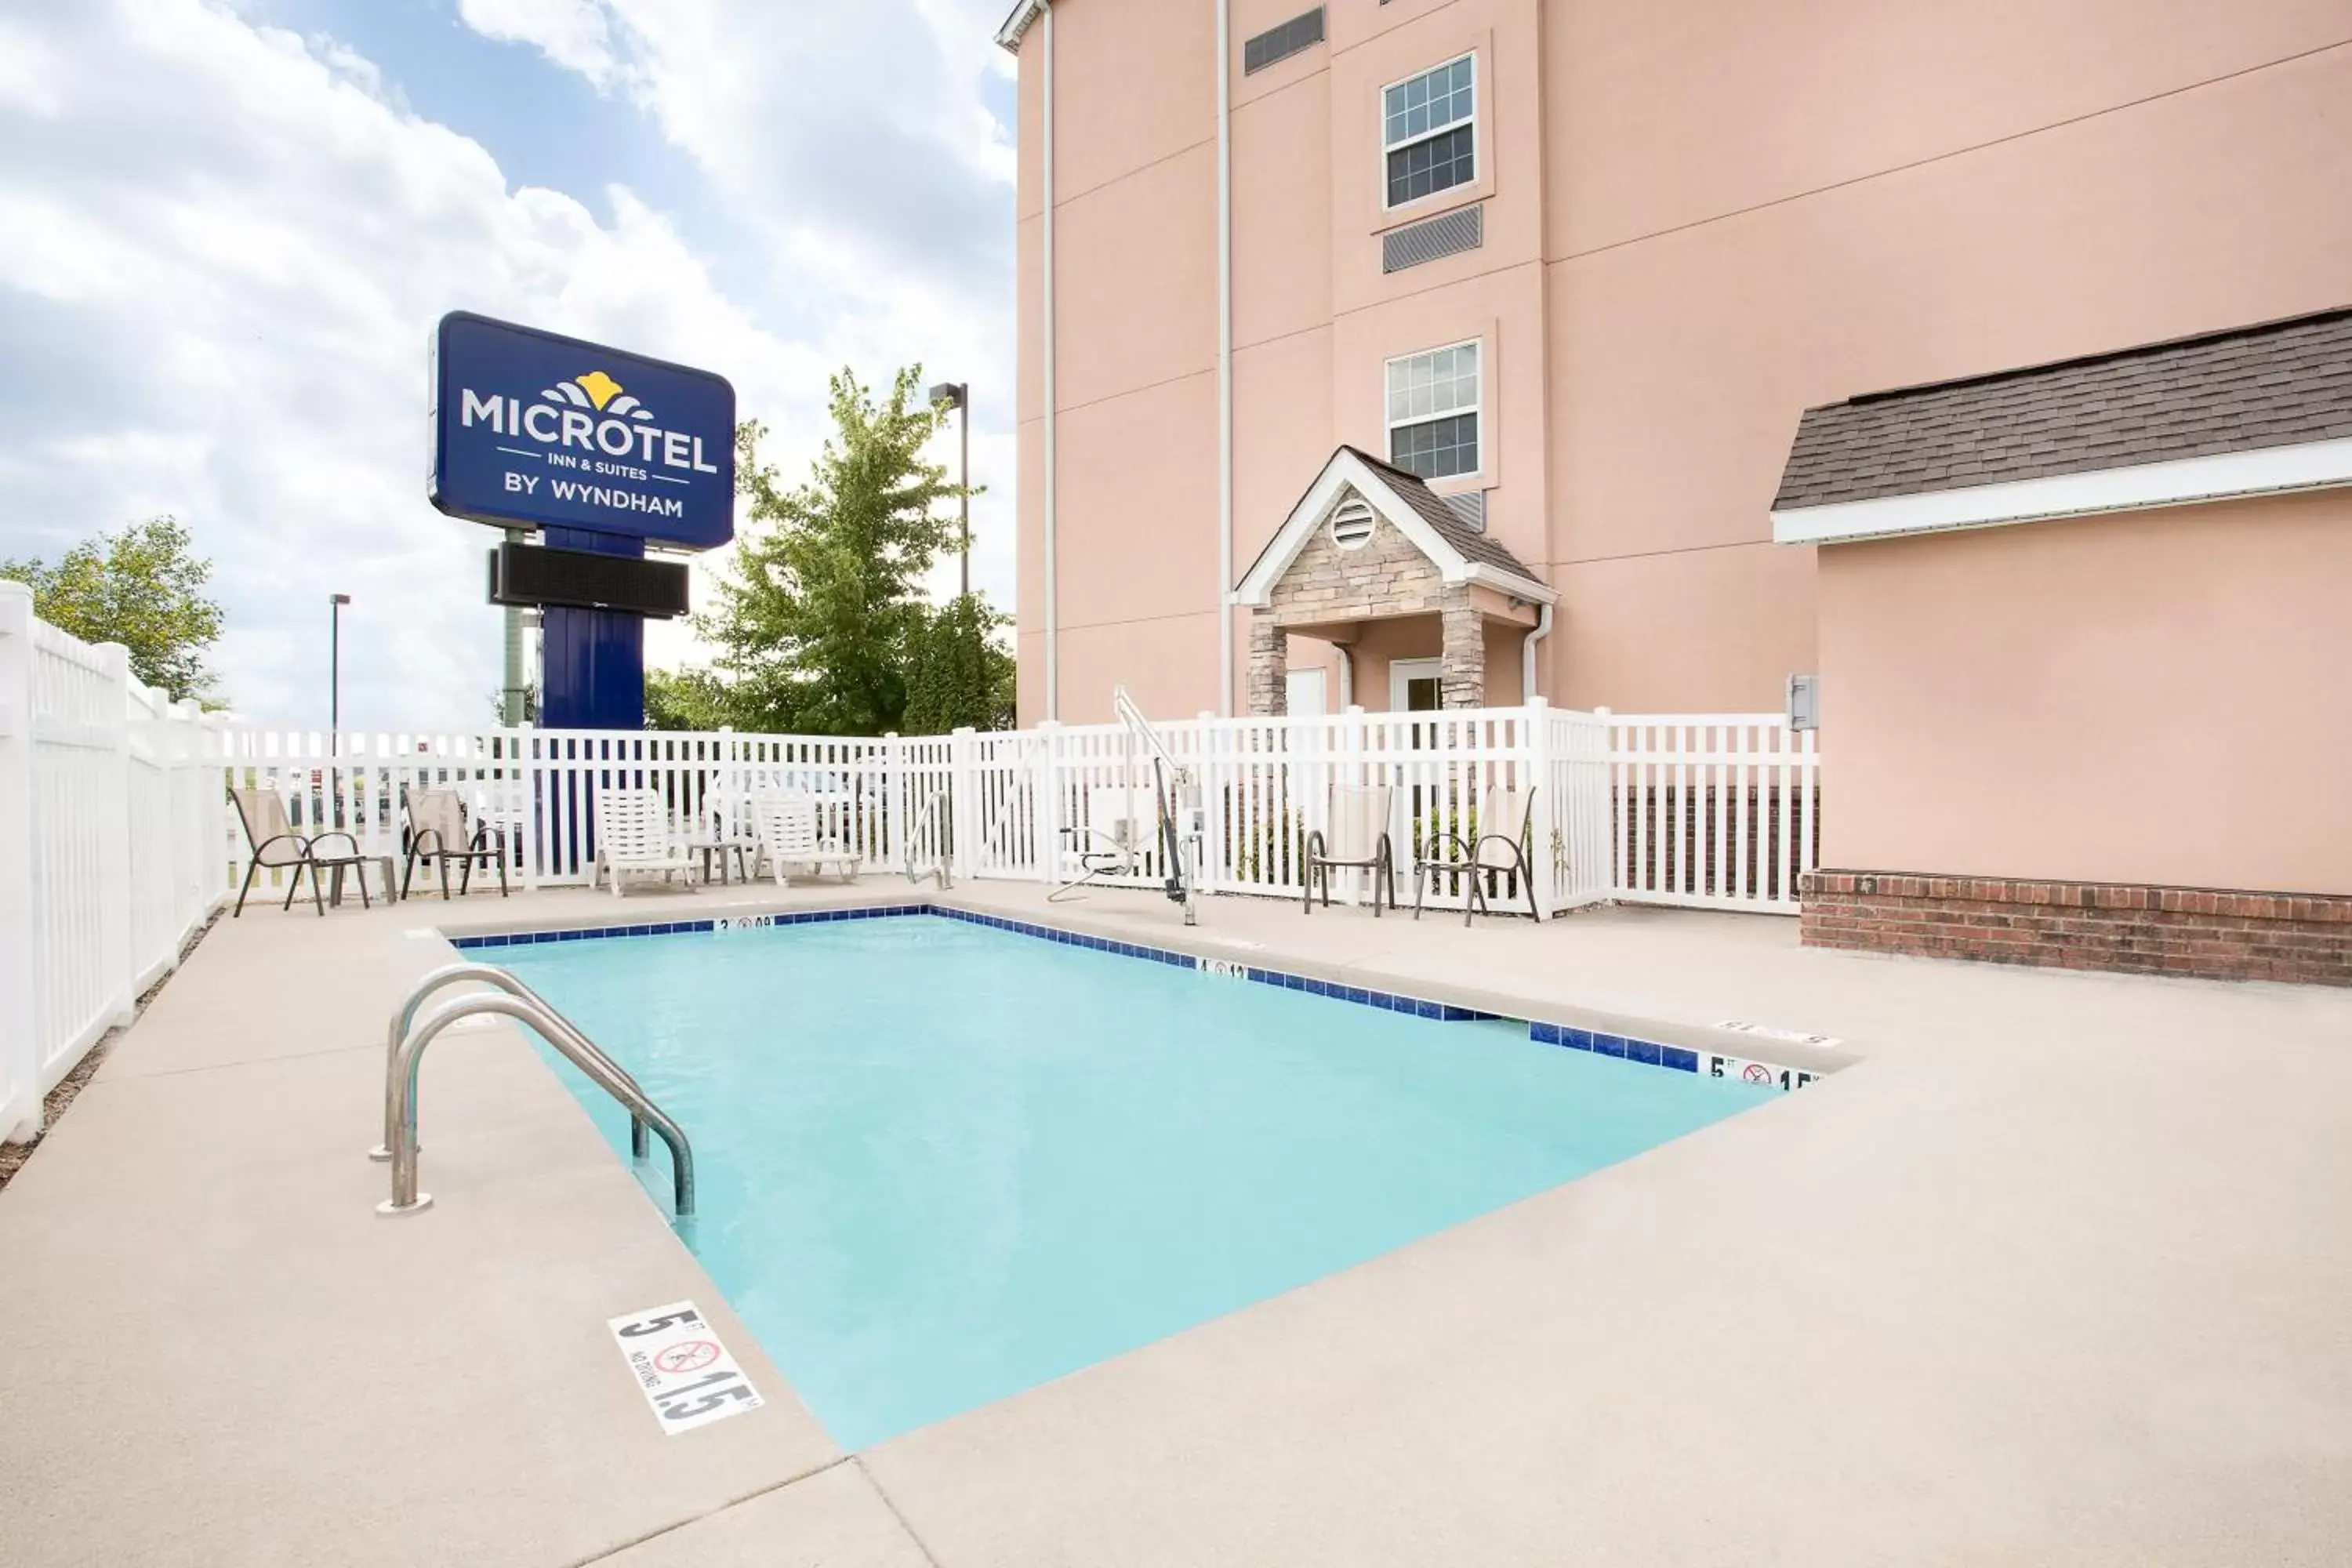 Patio, Property Building in Microtel Inn & Suites by Wyndham Tuscumbia/Muscle Shoals